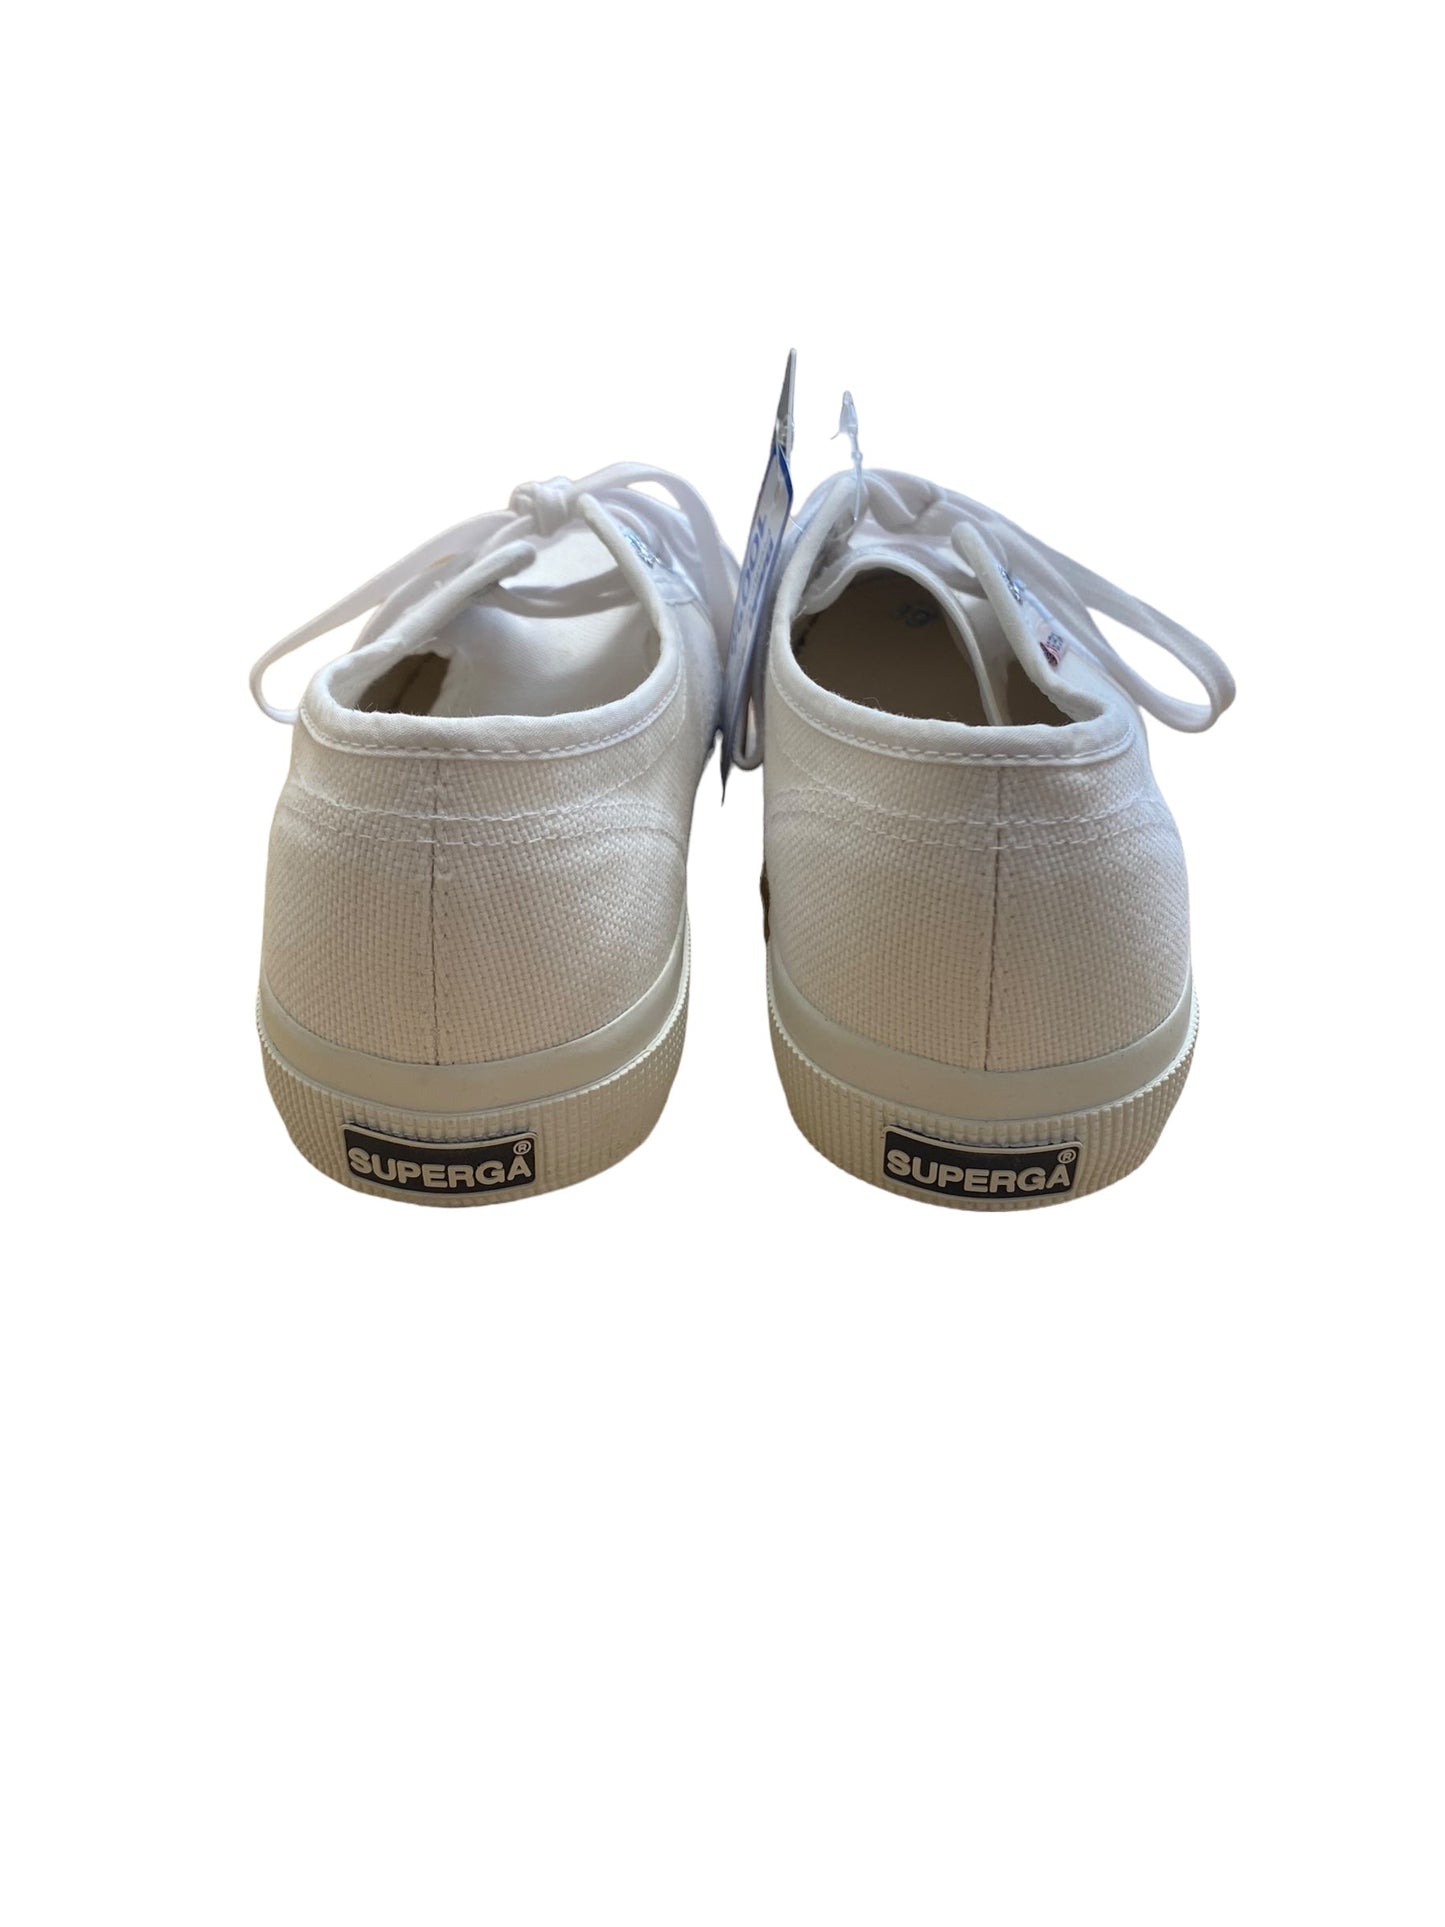 White Shoes Sneakers Superga, Size 8